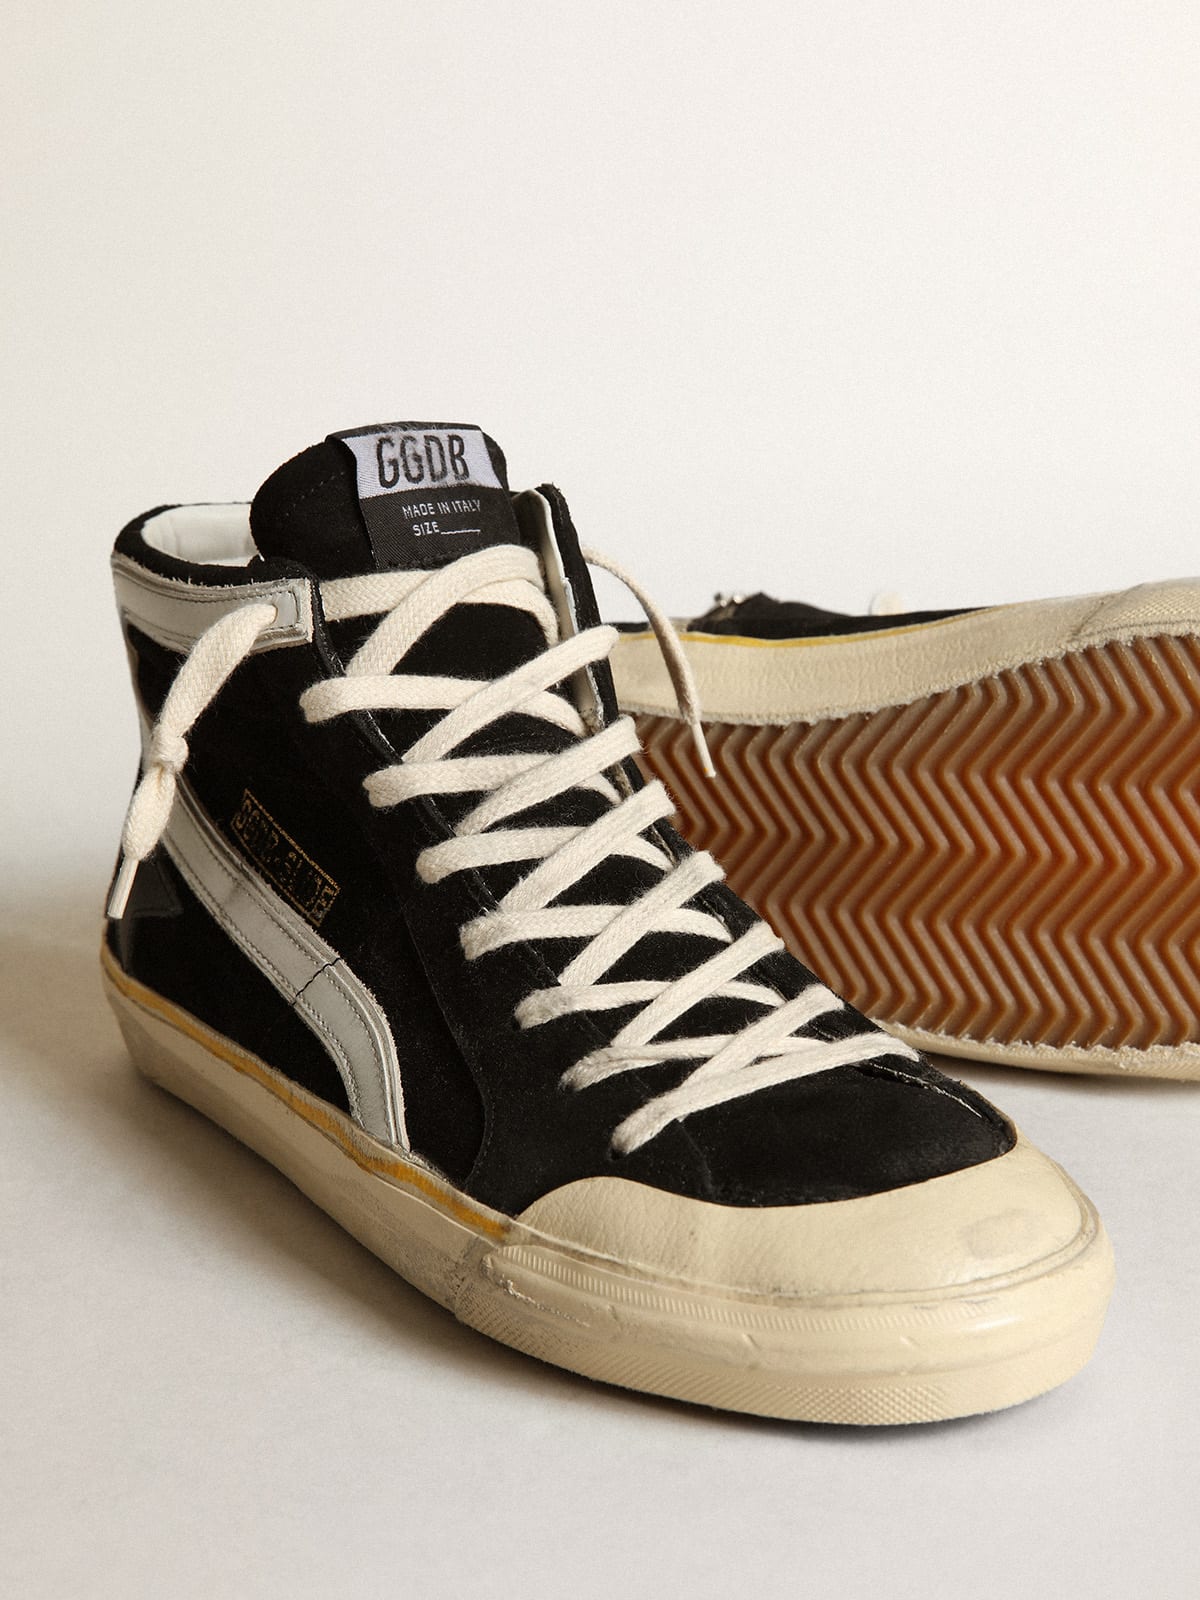 Golden Goose - Slide Penstar sneakers in black suede with black leather star and white leather flash in 